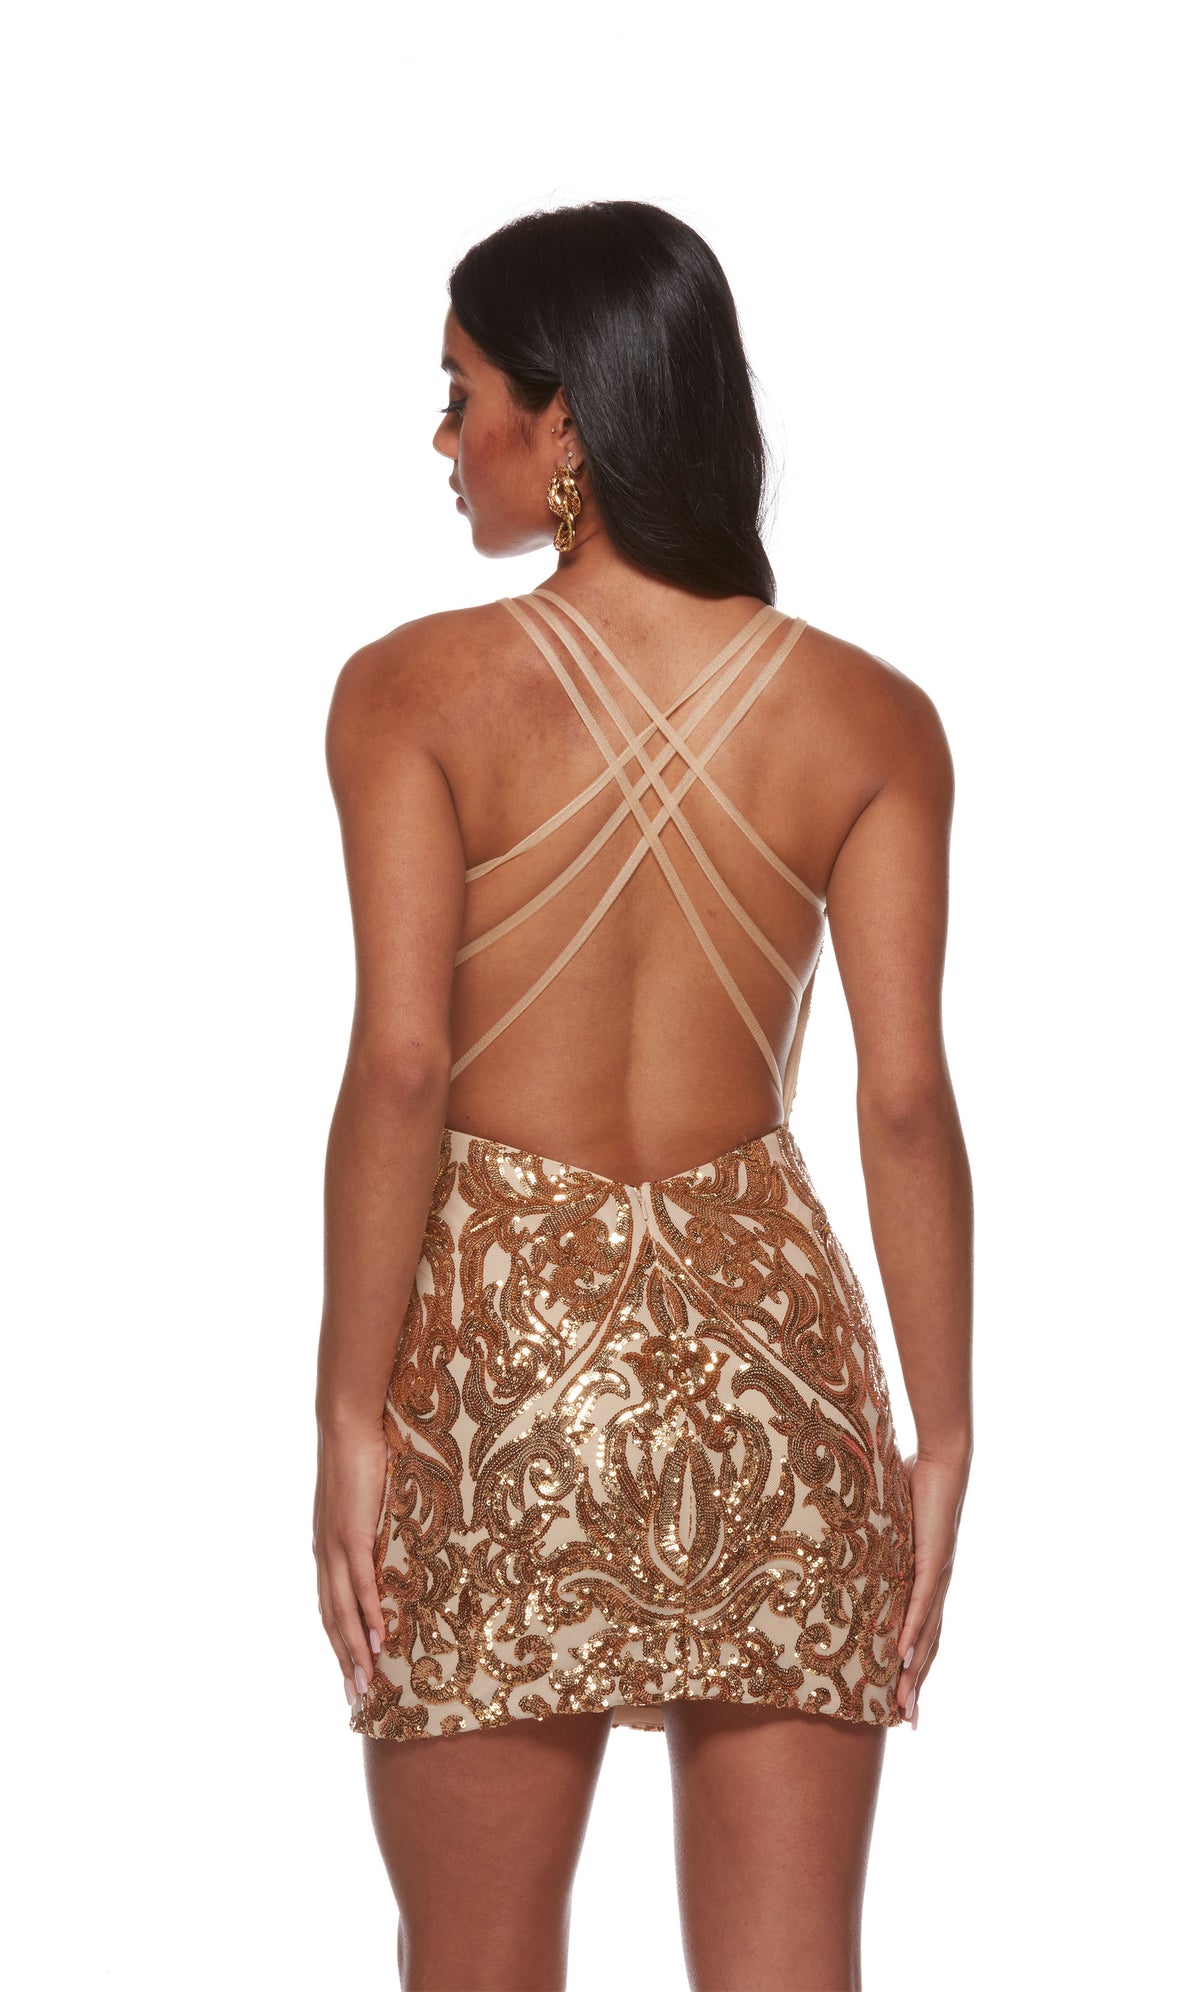 A vintage-inspired short gold formal dress in a shimmery sequin paisley pattern, featuring a strappy, open back and a fitted silhouette.